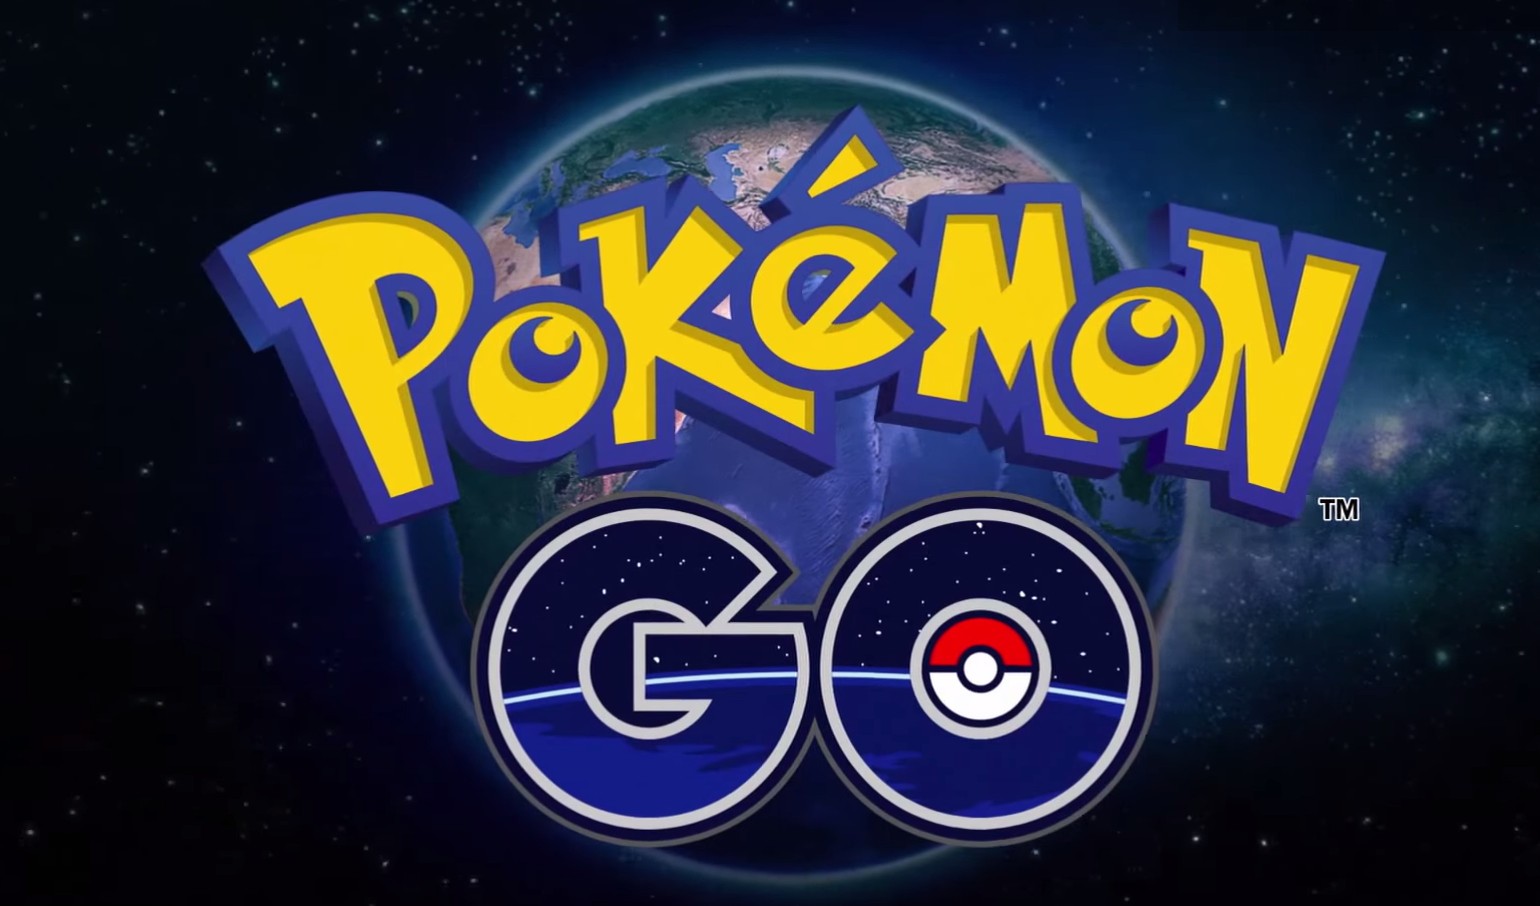 Nintendo Announces Pokemon GO Mobile Game, Coming to Android & iOS in 20161540 x 906